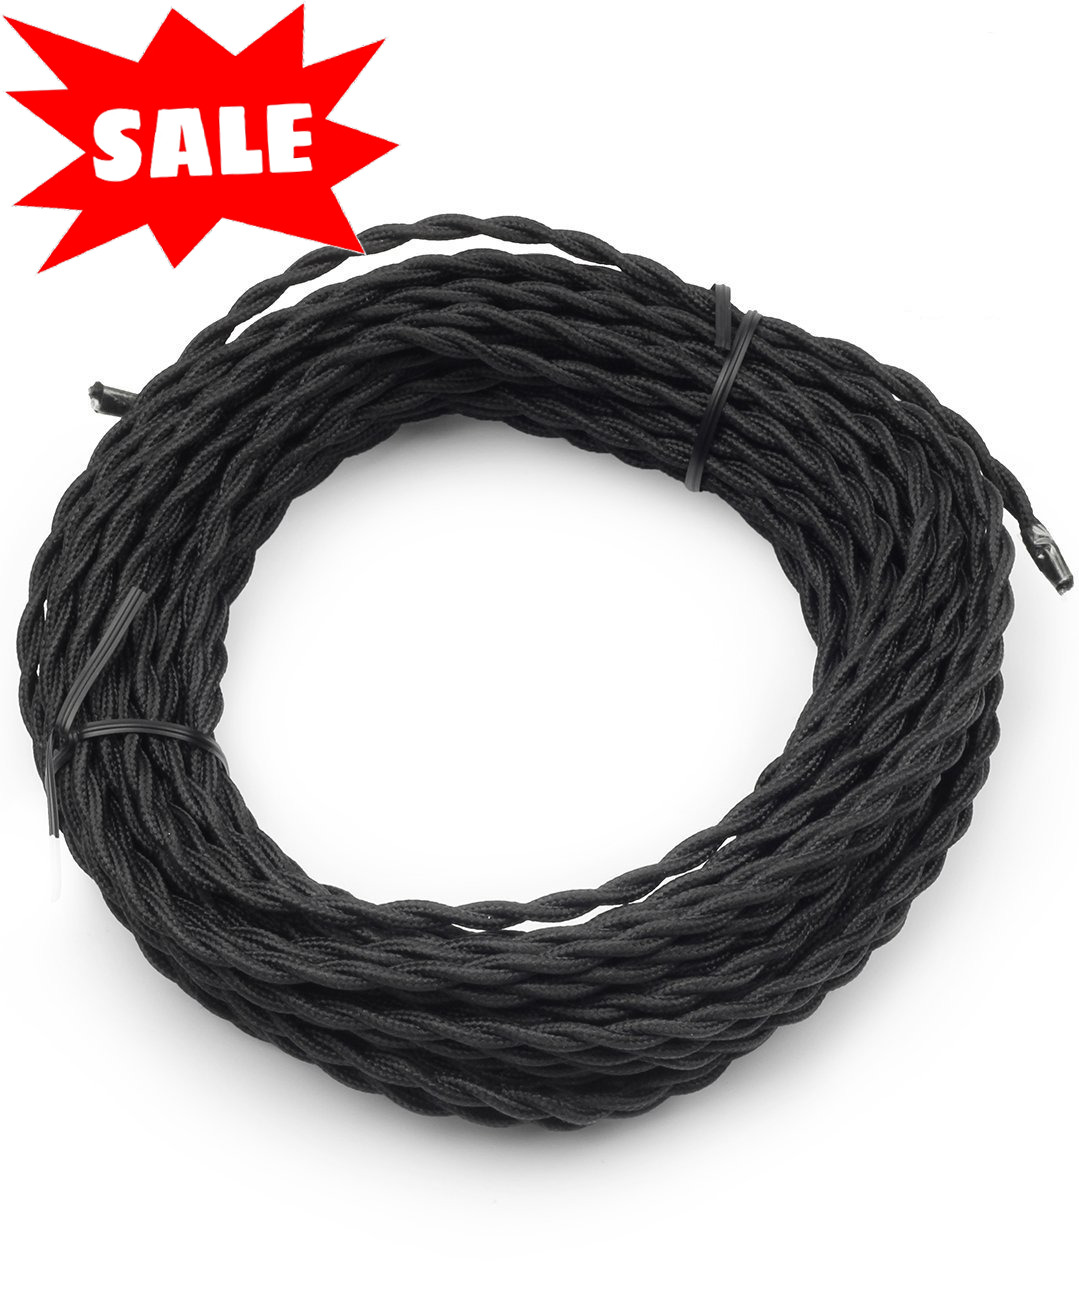 50ft Black Twisted Cloth Covered Wire Vintage Antique Lamp Cord Electrical 300 V